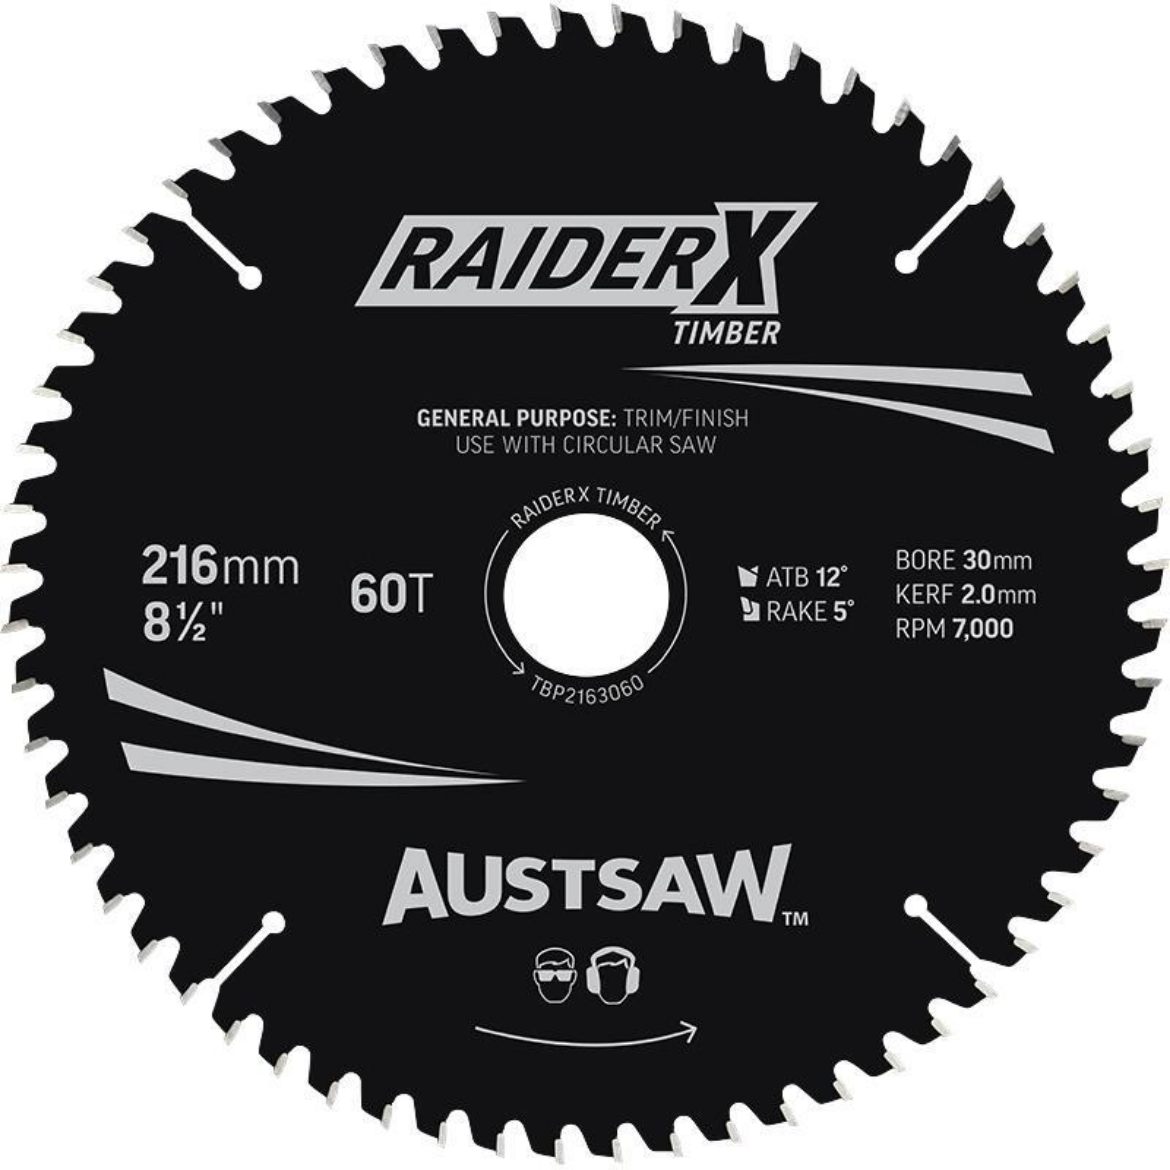 Picture of Austsaw RaiderX Timber Blade 216mm x 30/15.88 Bore x 60 T